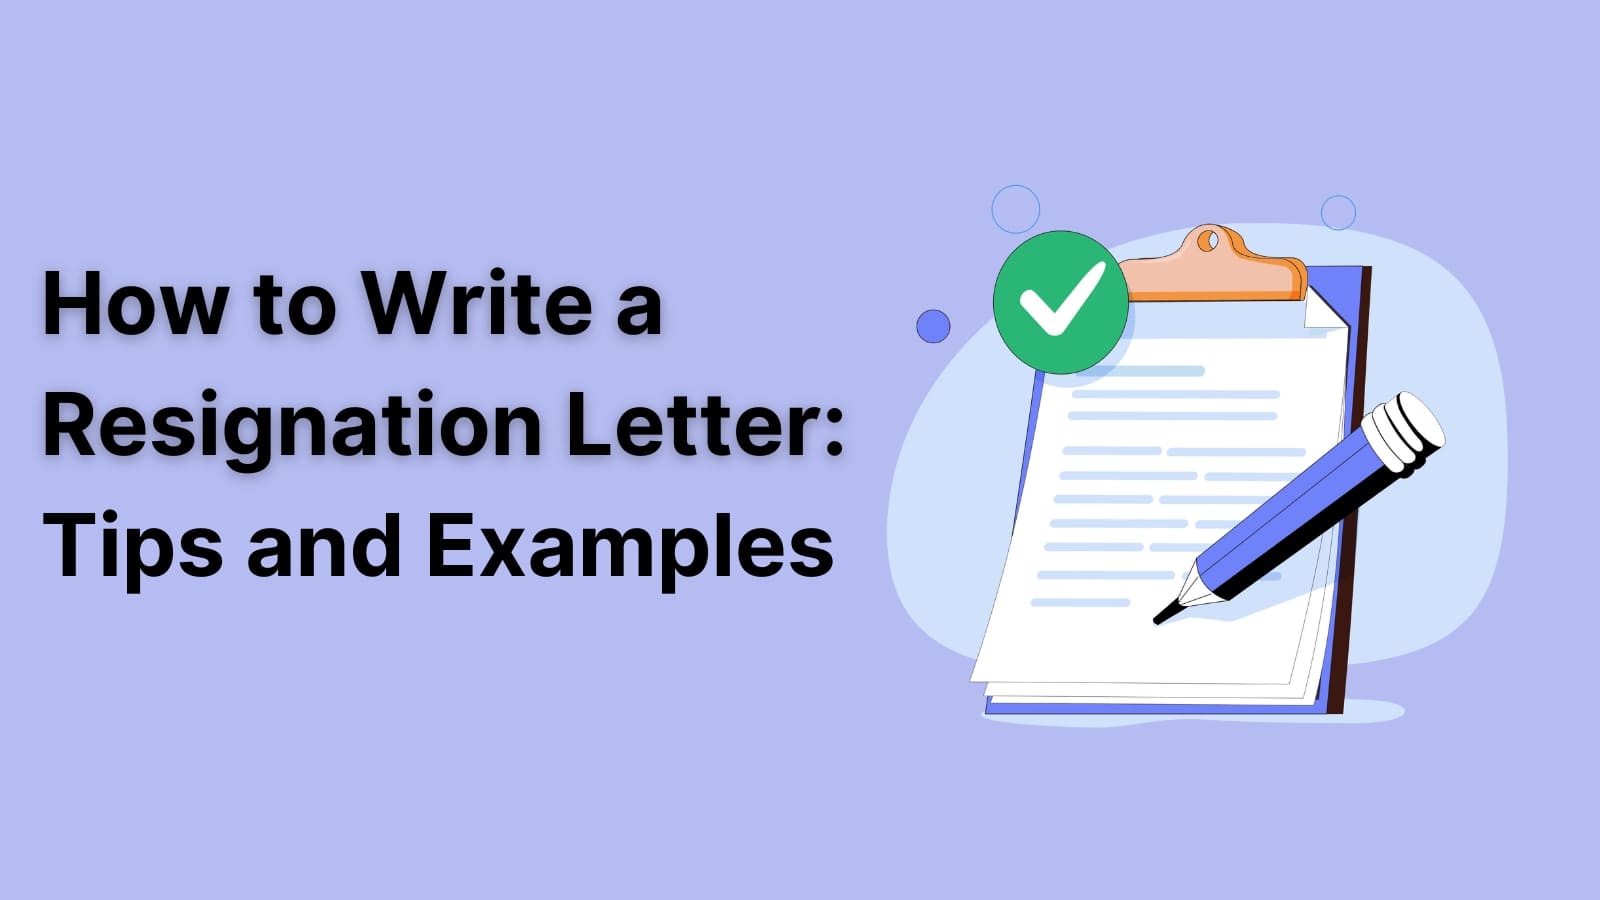 How to Write a Resignation Letter: Tips and Examples